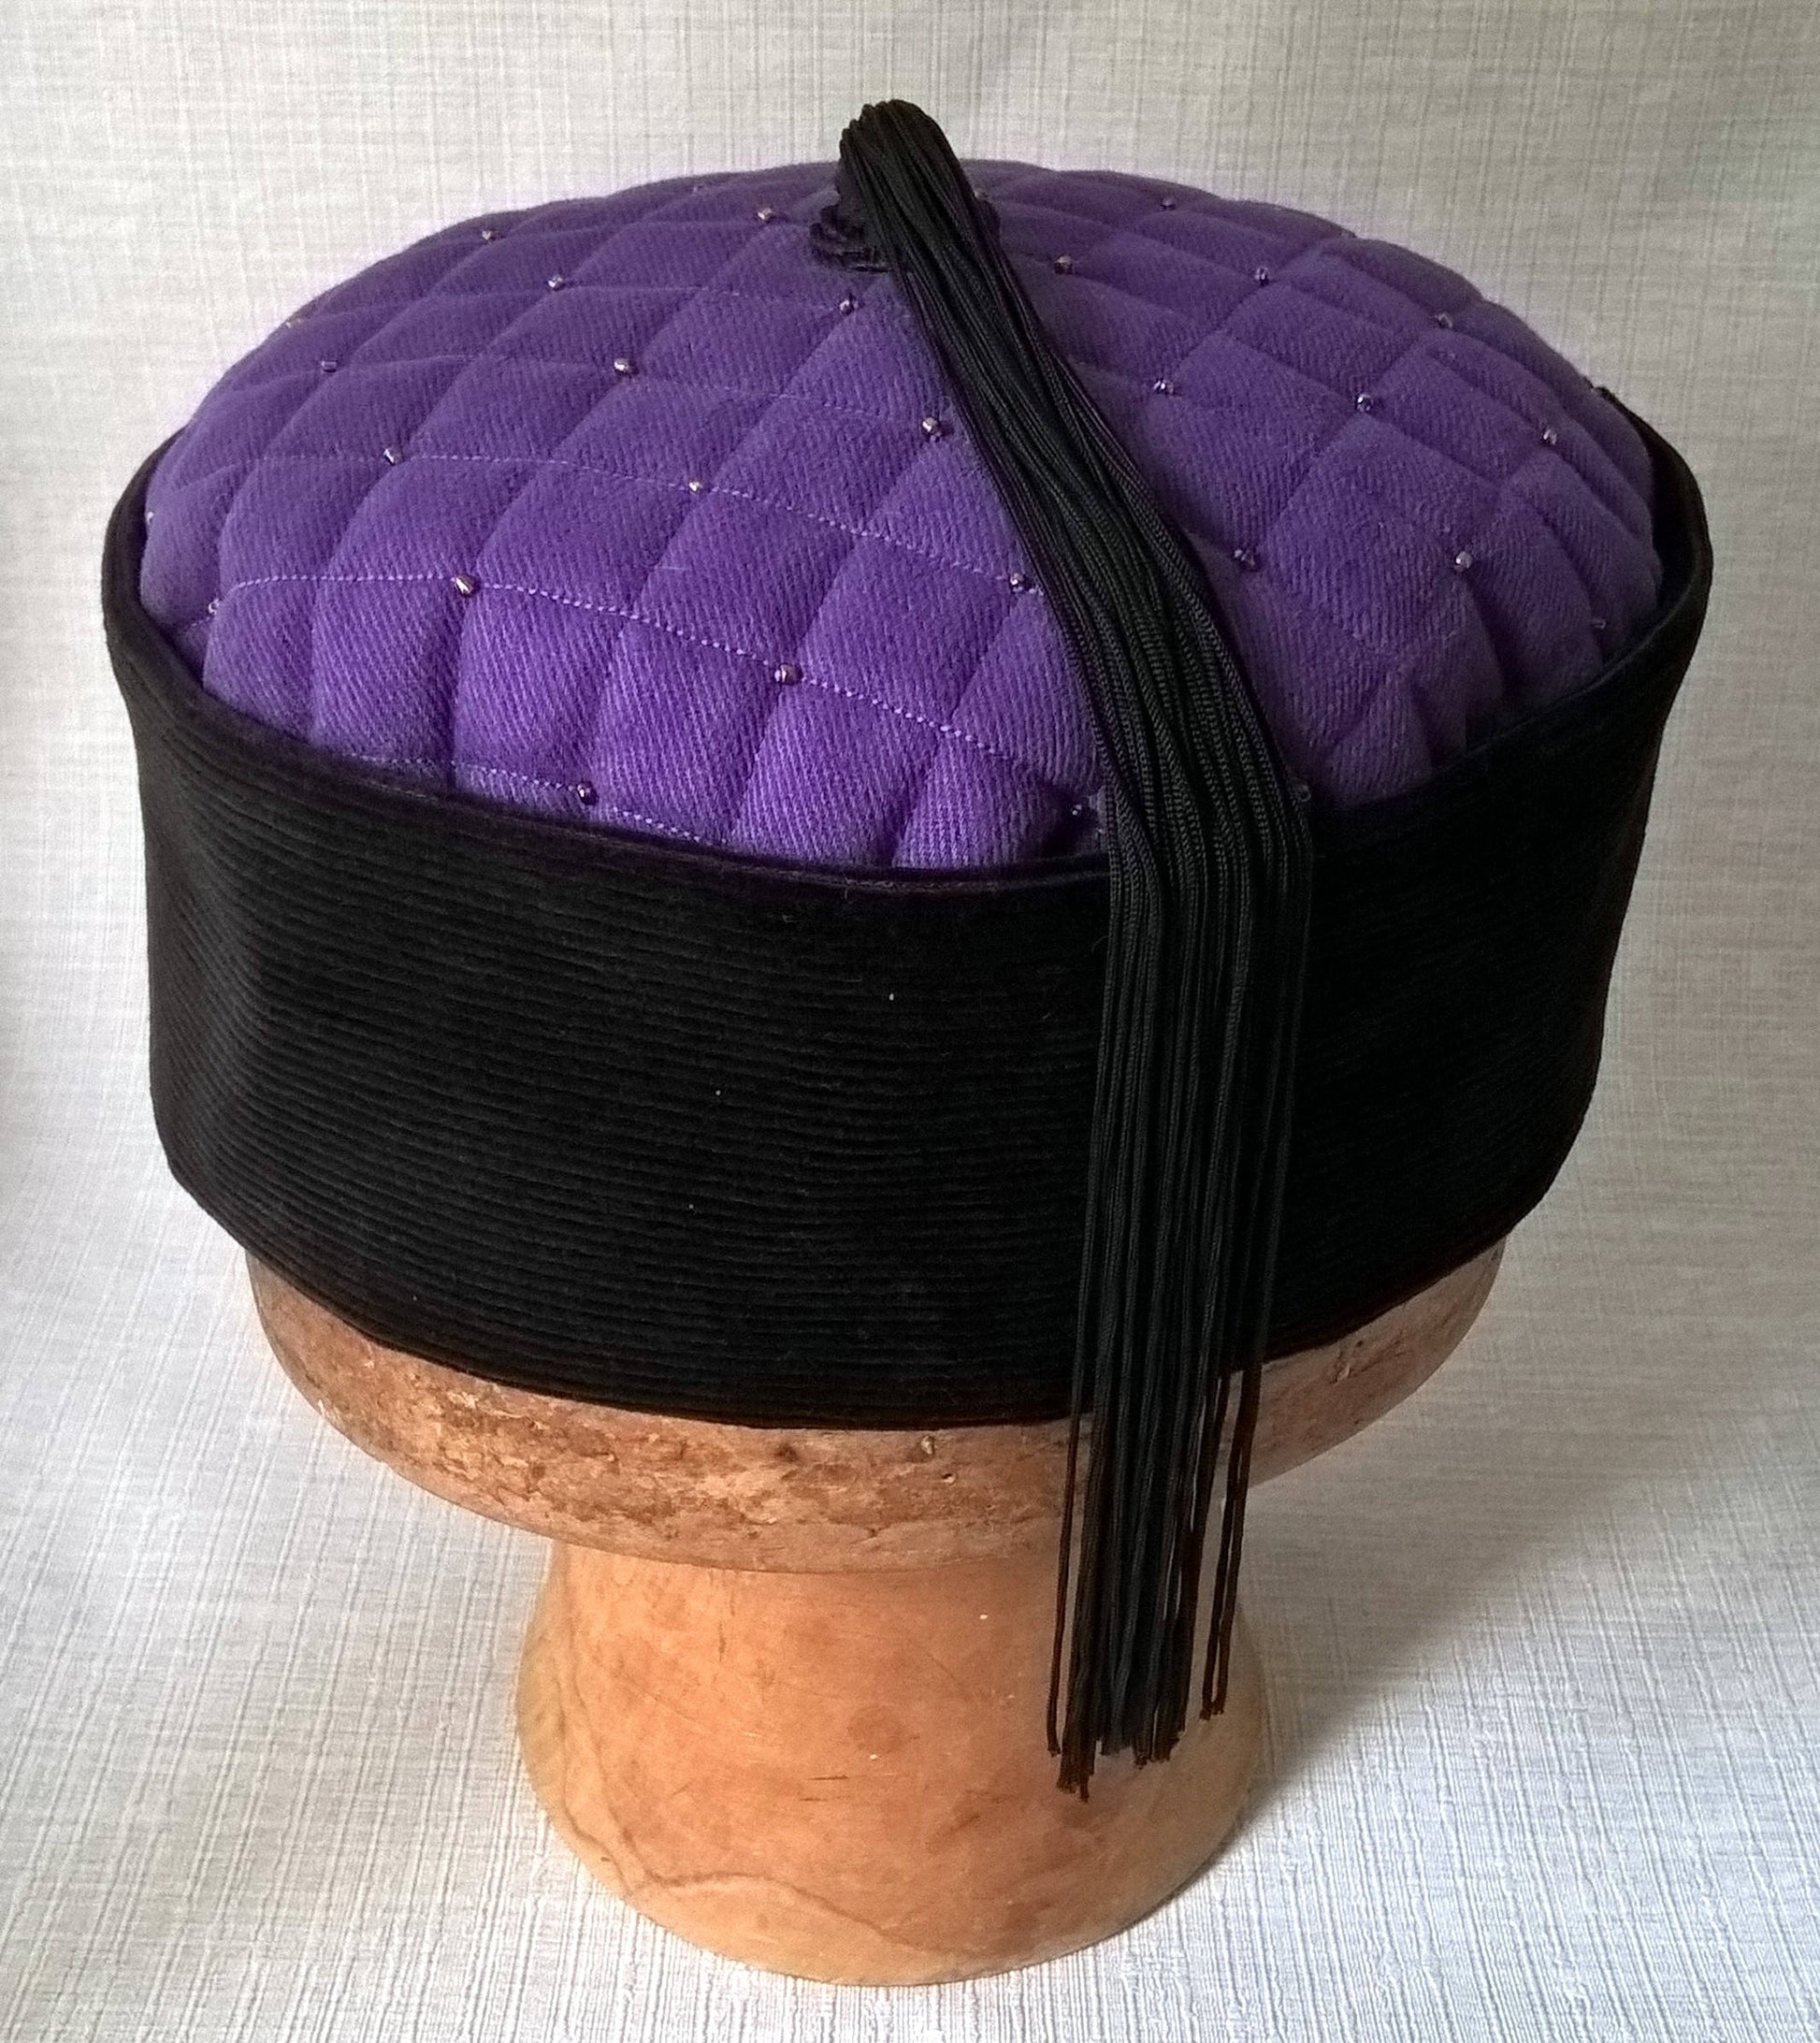 A beautiful tassel crafted from vintage black fringing completes this mens smoking cap